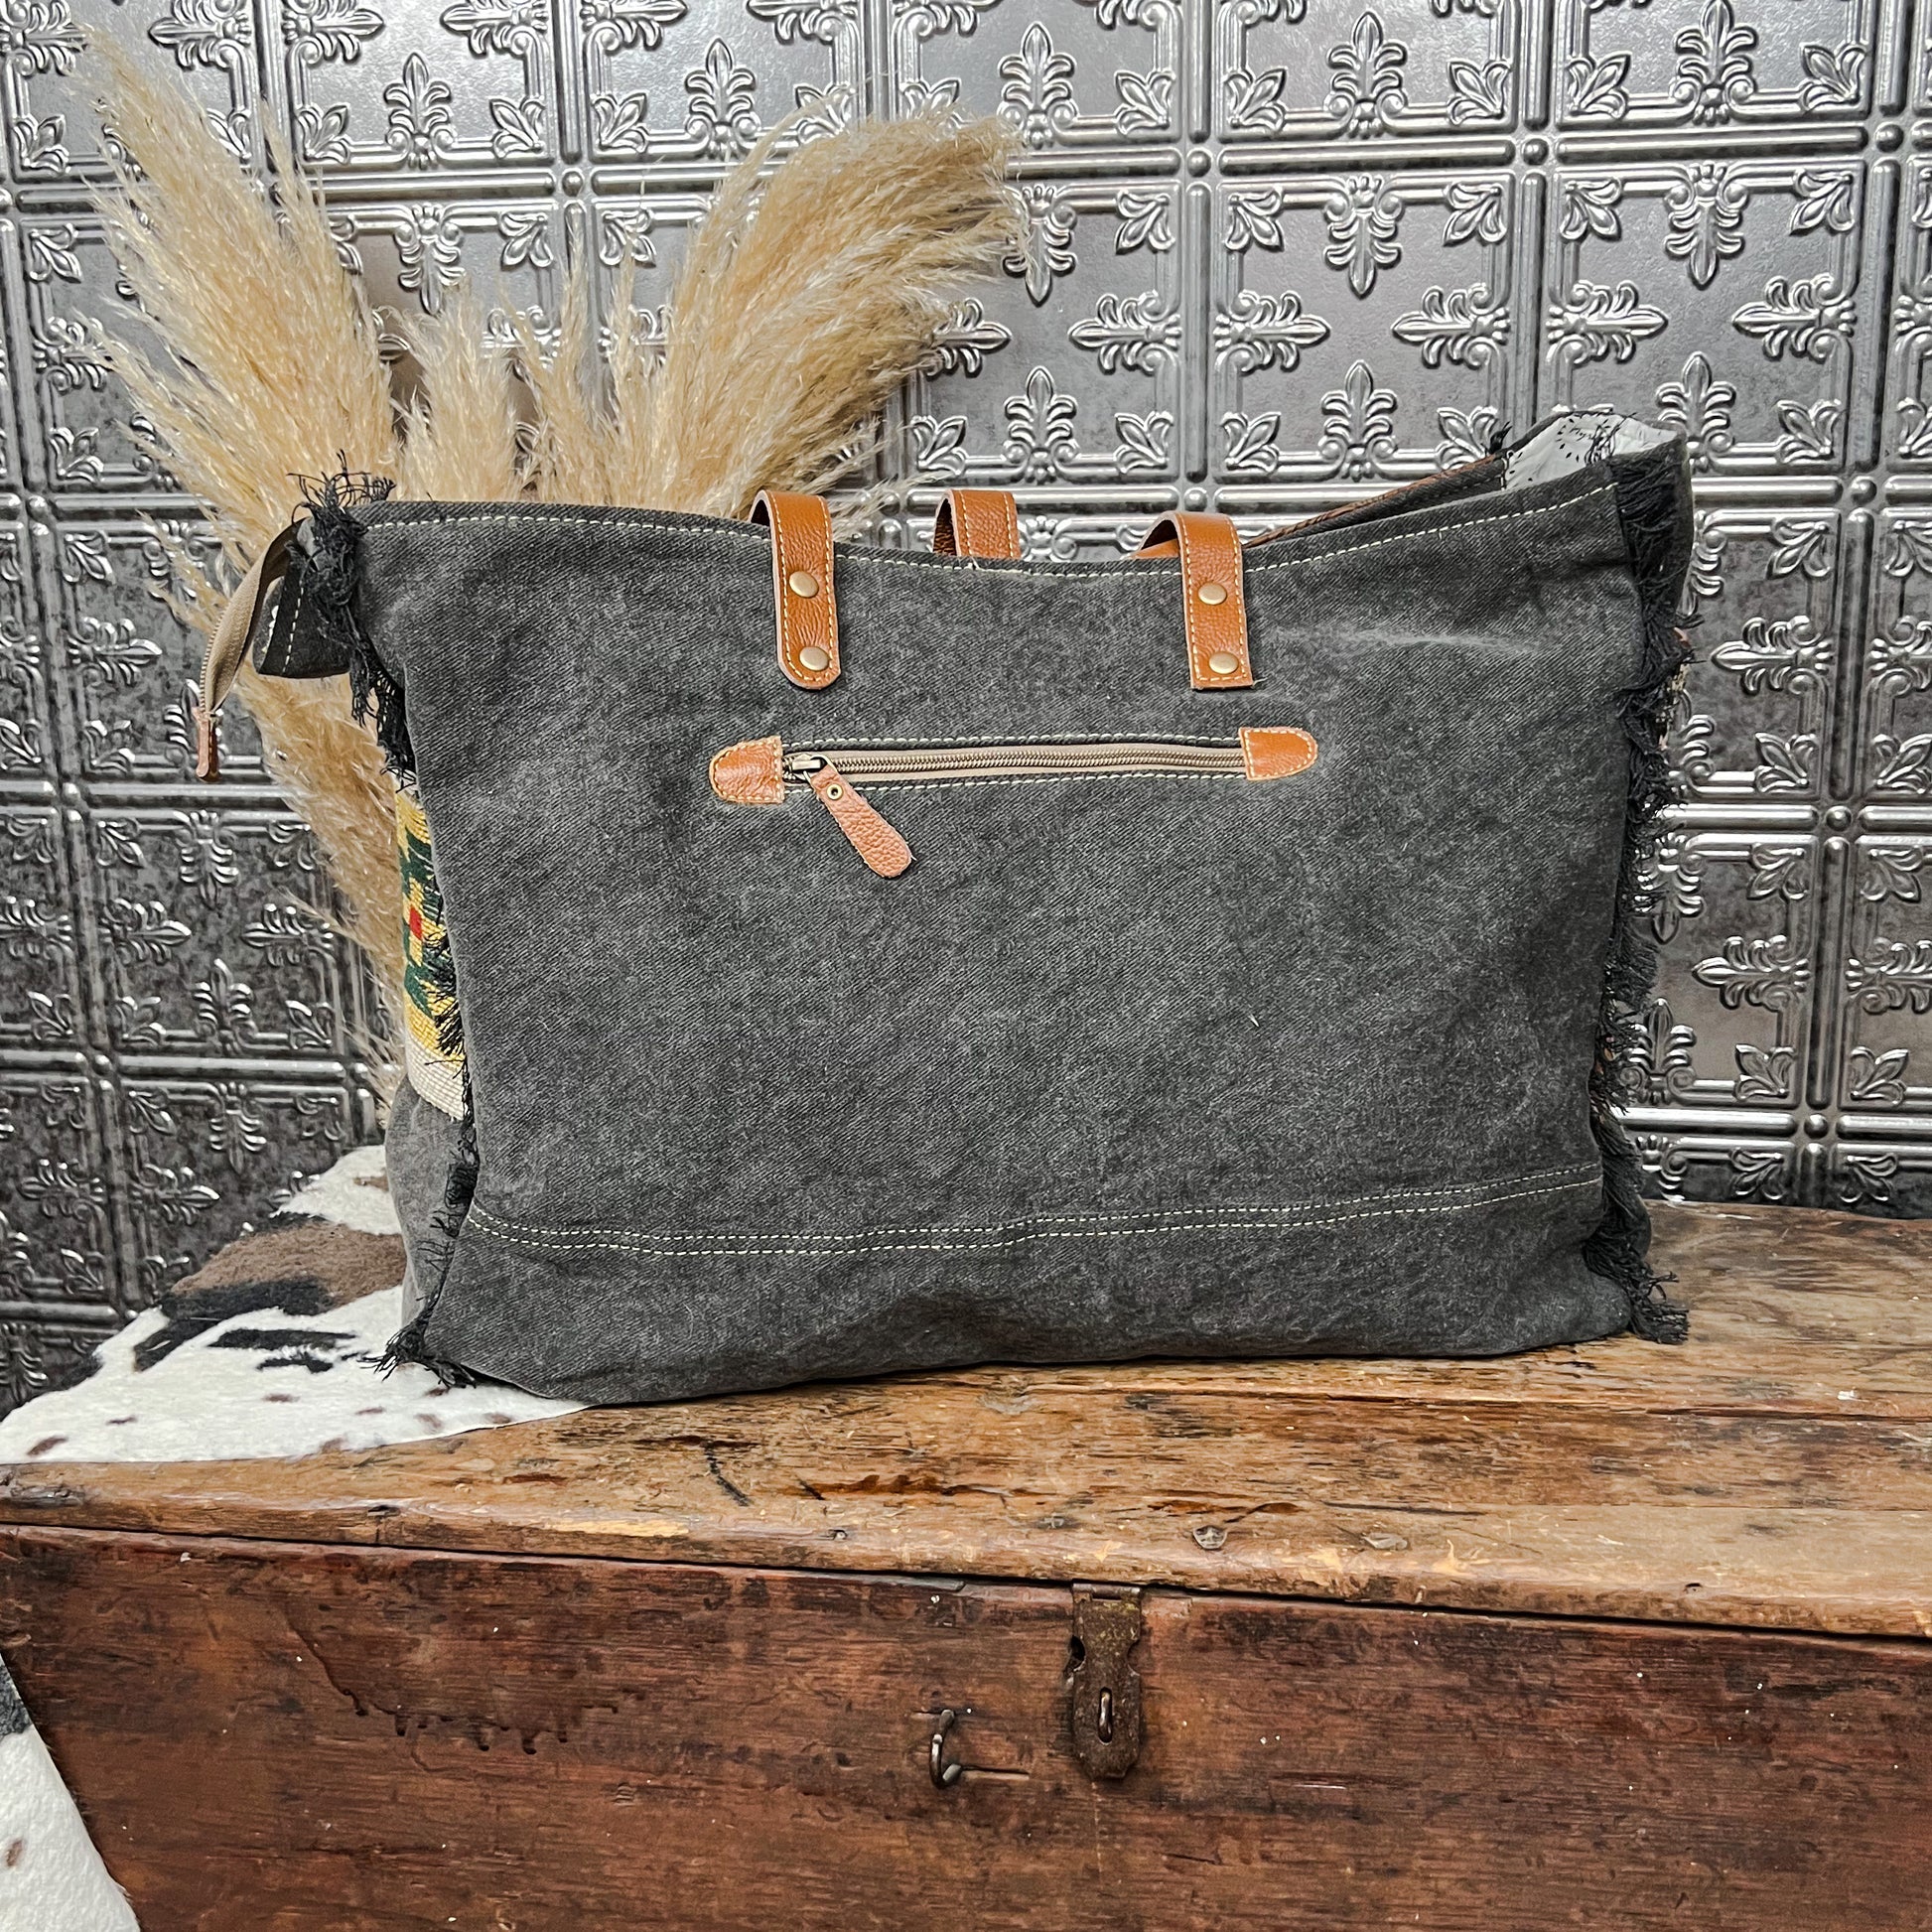 canvas and cowhide patchwork tote style weekender bag western boho boutique